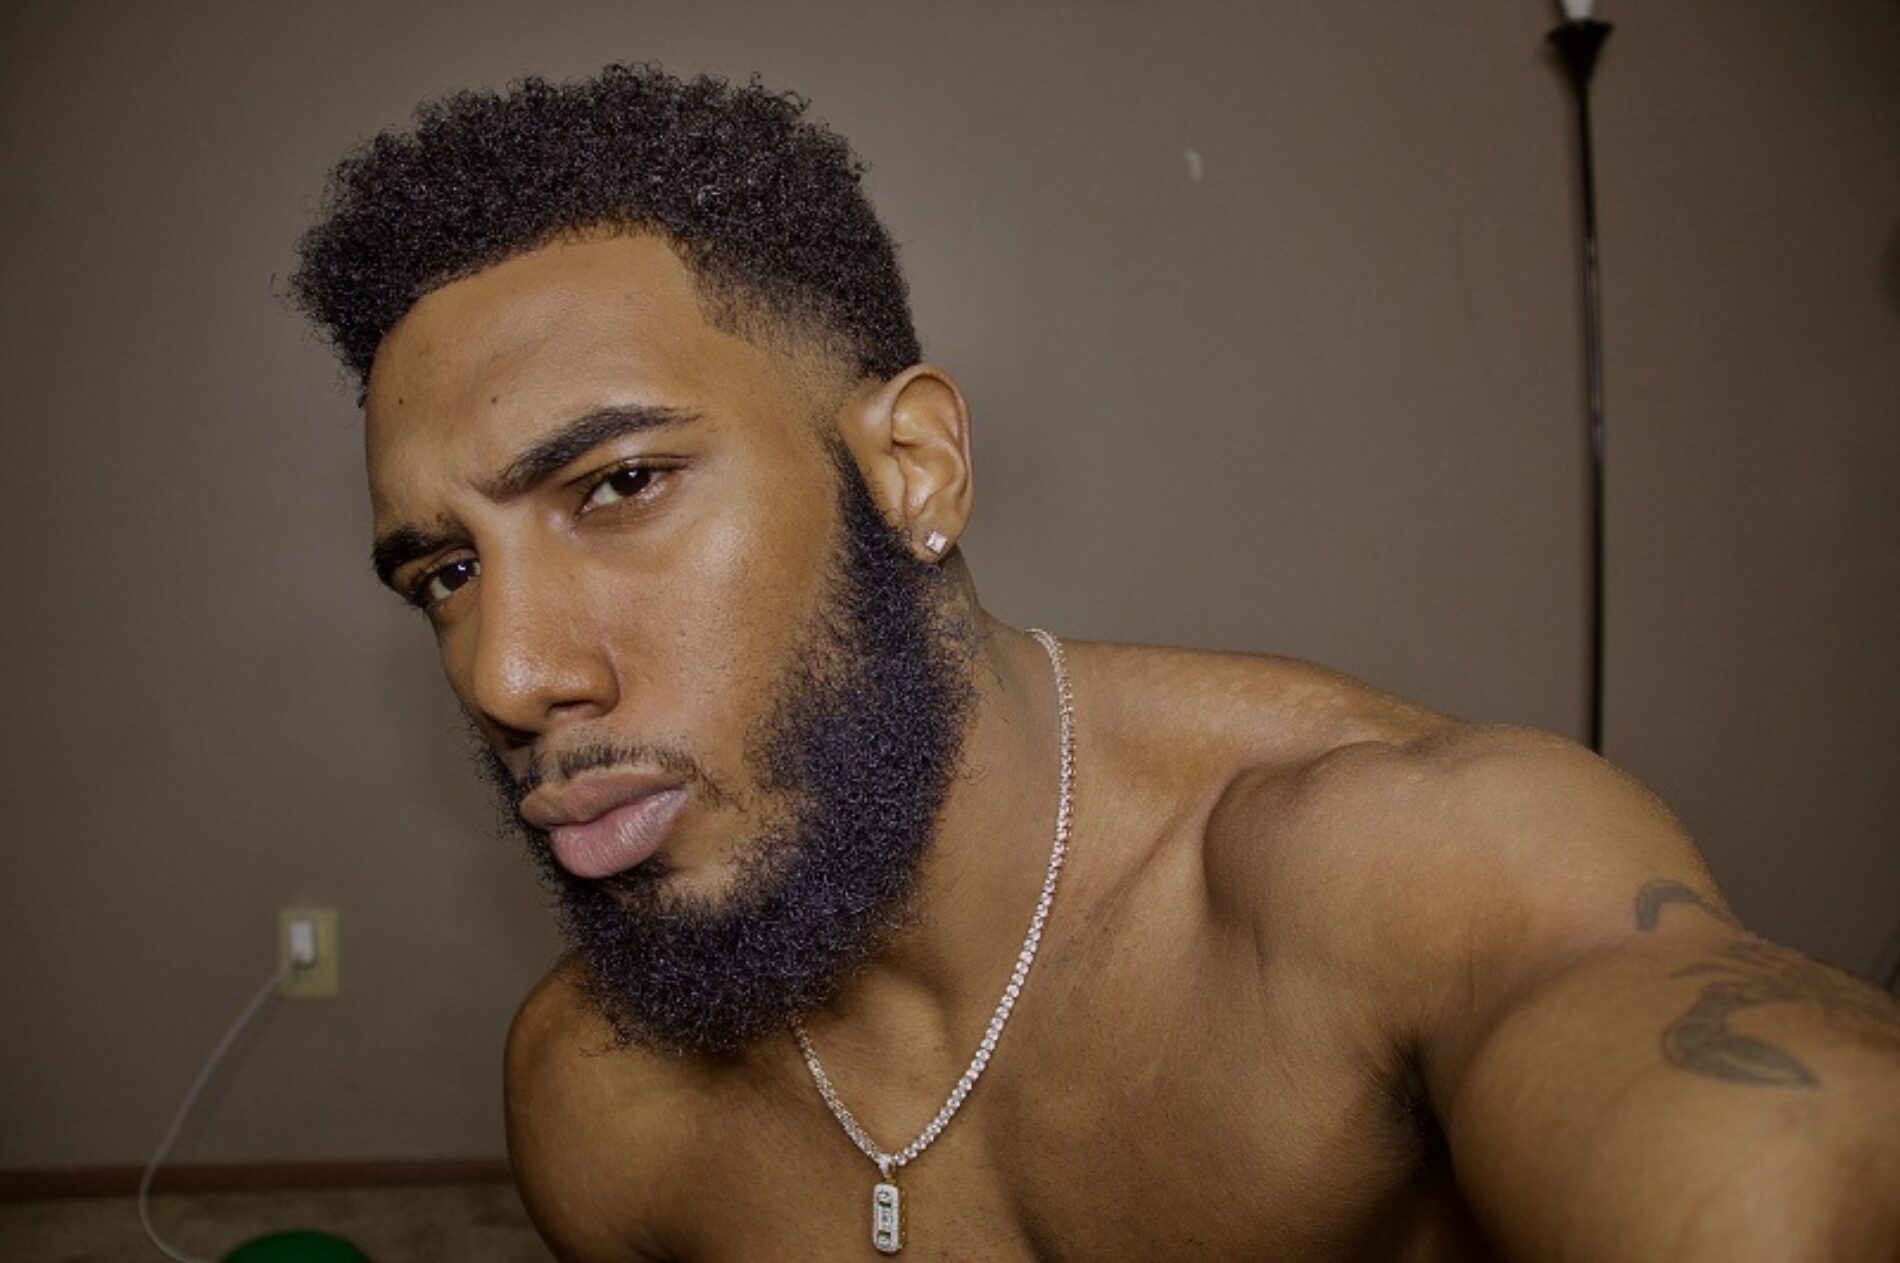 OnlyFans Content Creator, Drevon Odoms, protests the attention of his homosexual followers and insists he’s not gay